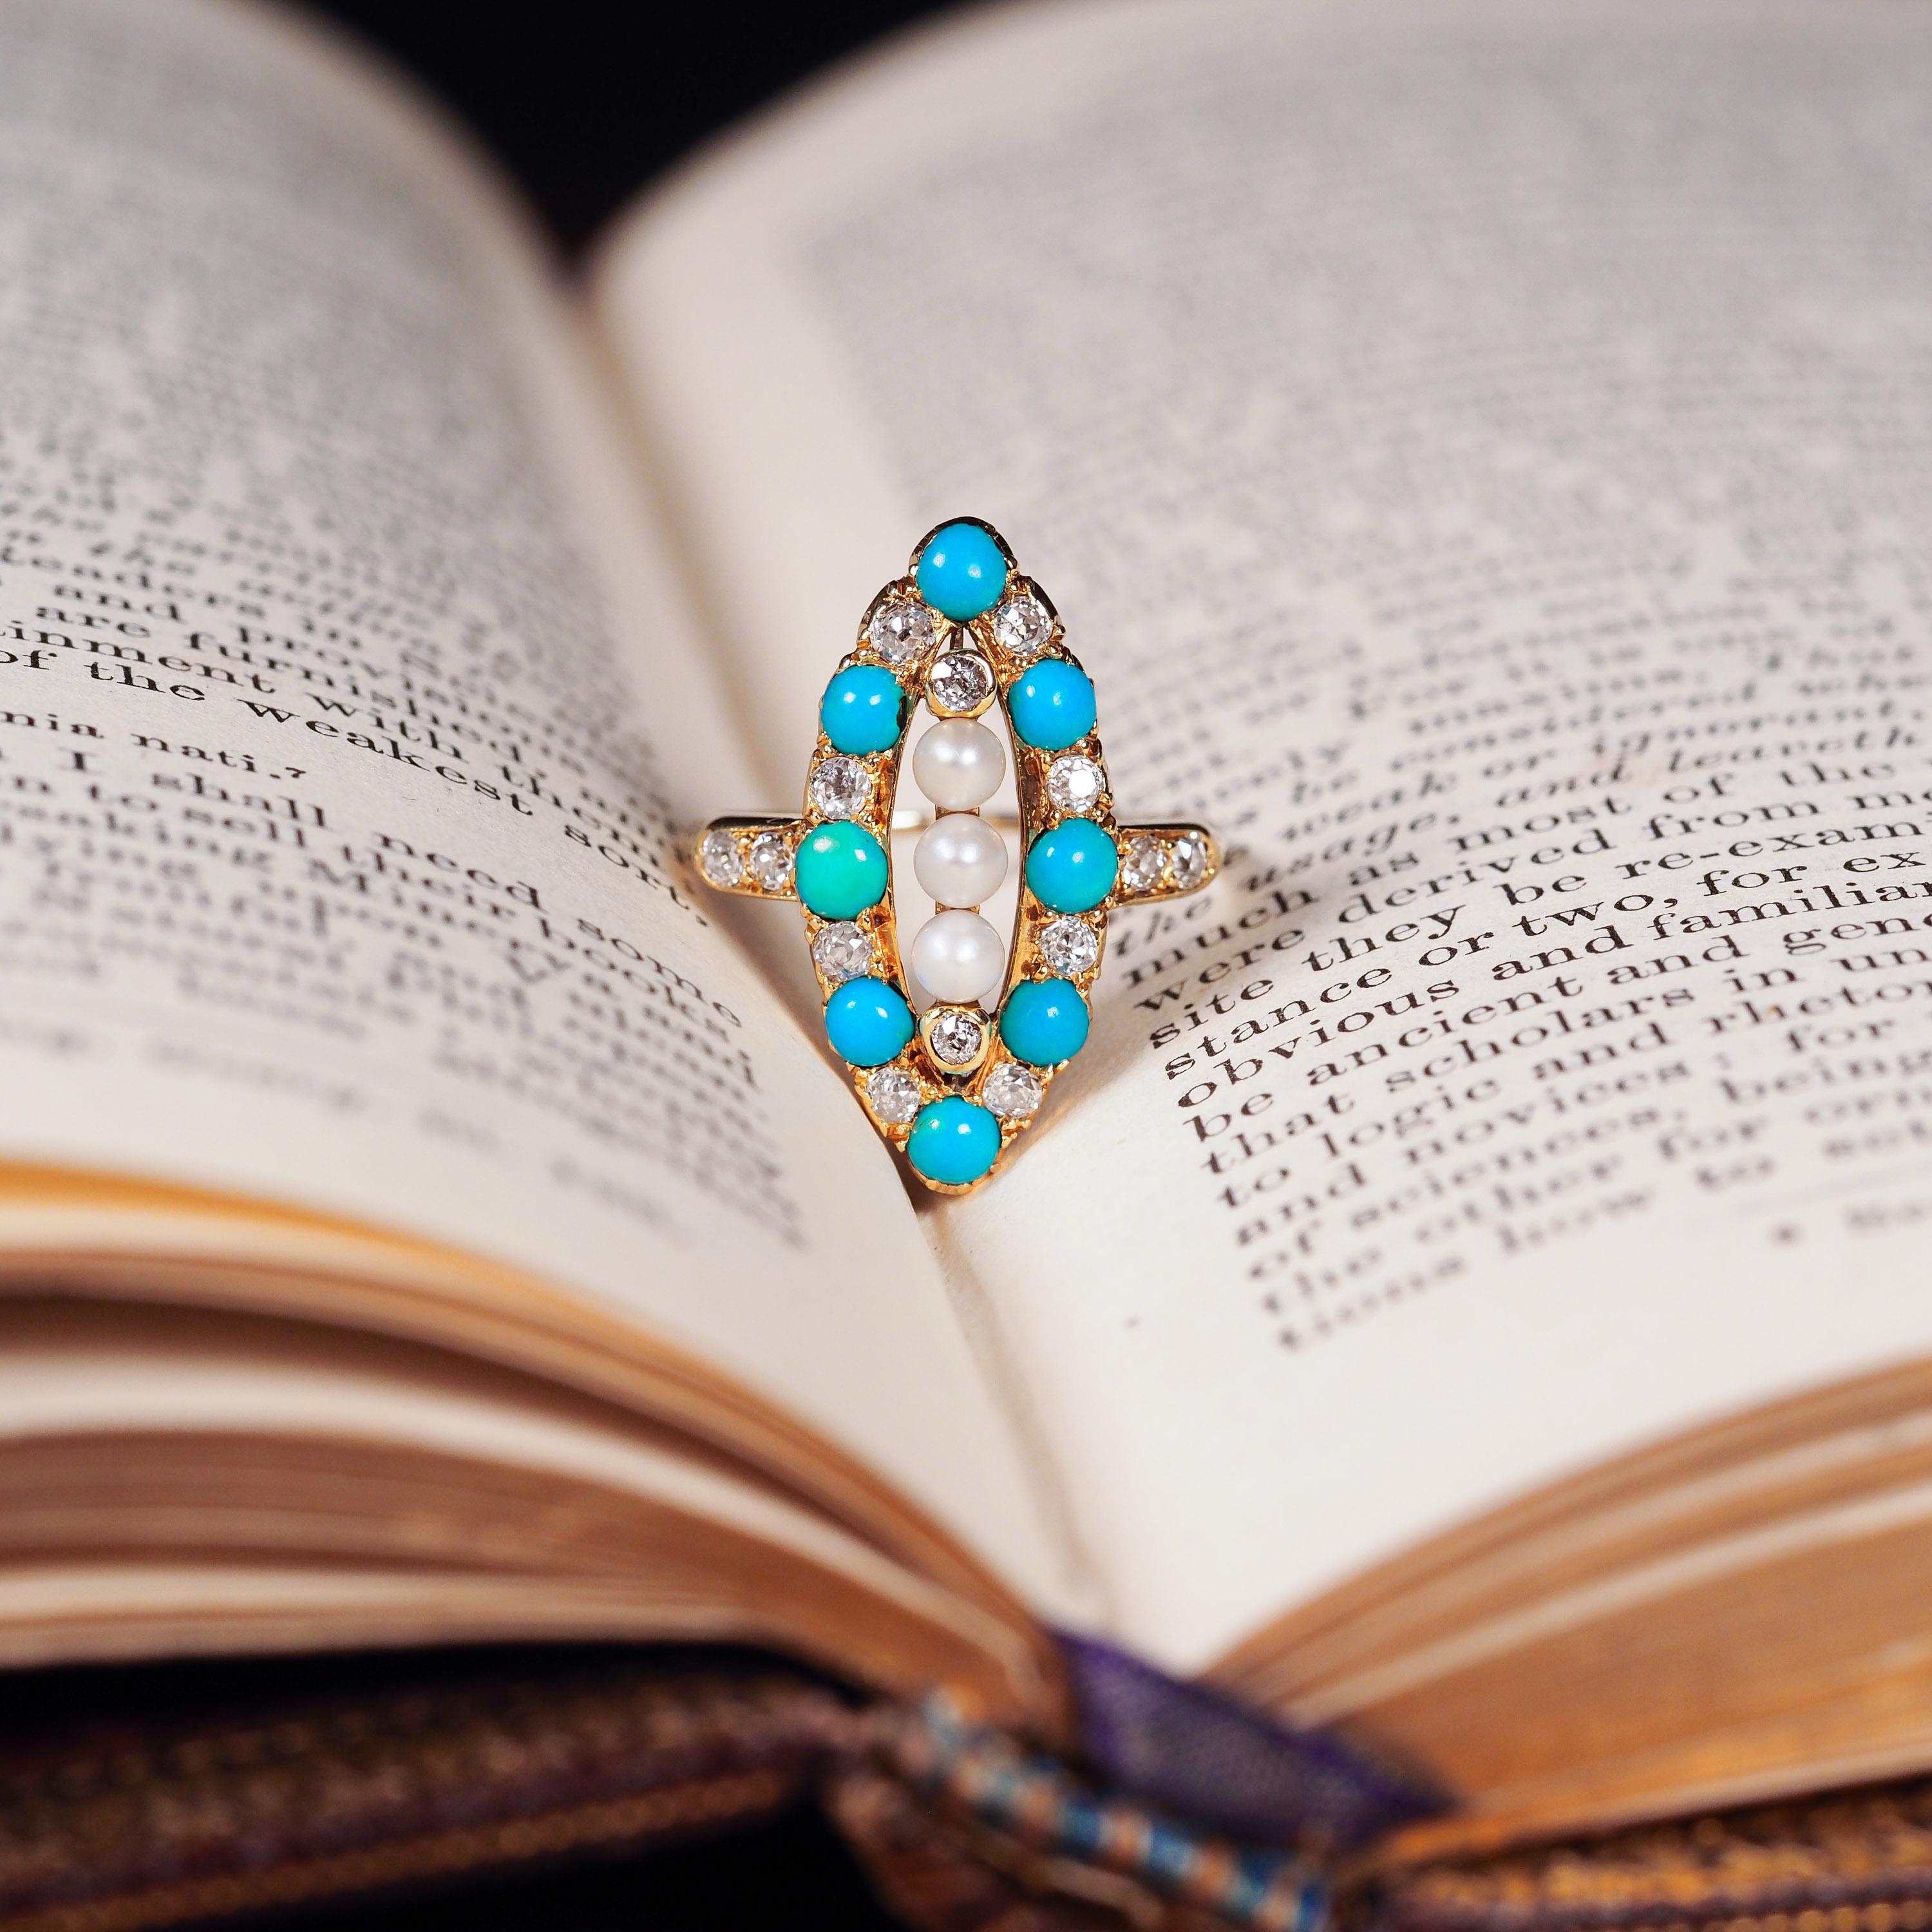 Old European Cut Antique Victorian Diamond Pearl Turquoise 18K Gold Ring Navette/Marquise c.1880 For Sale